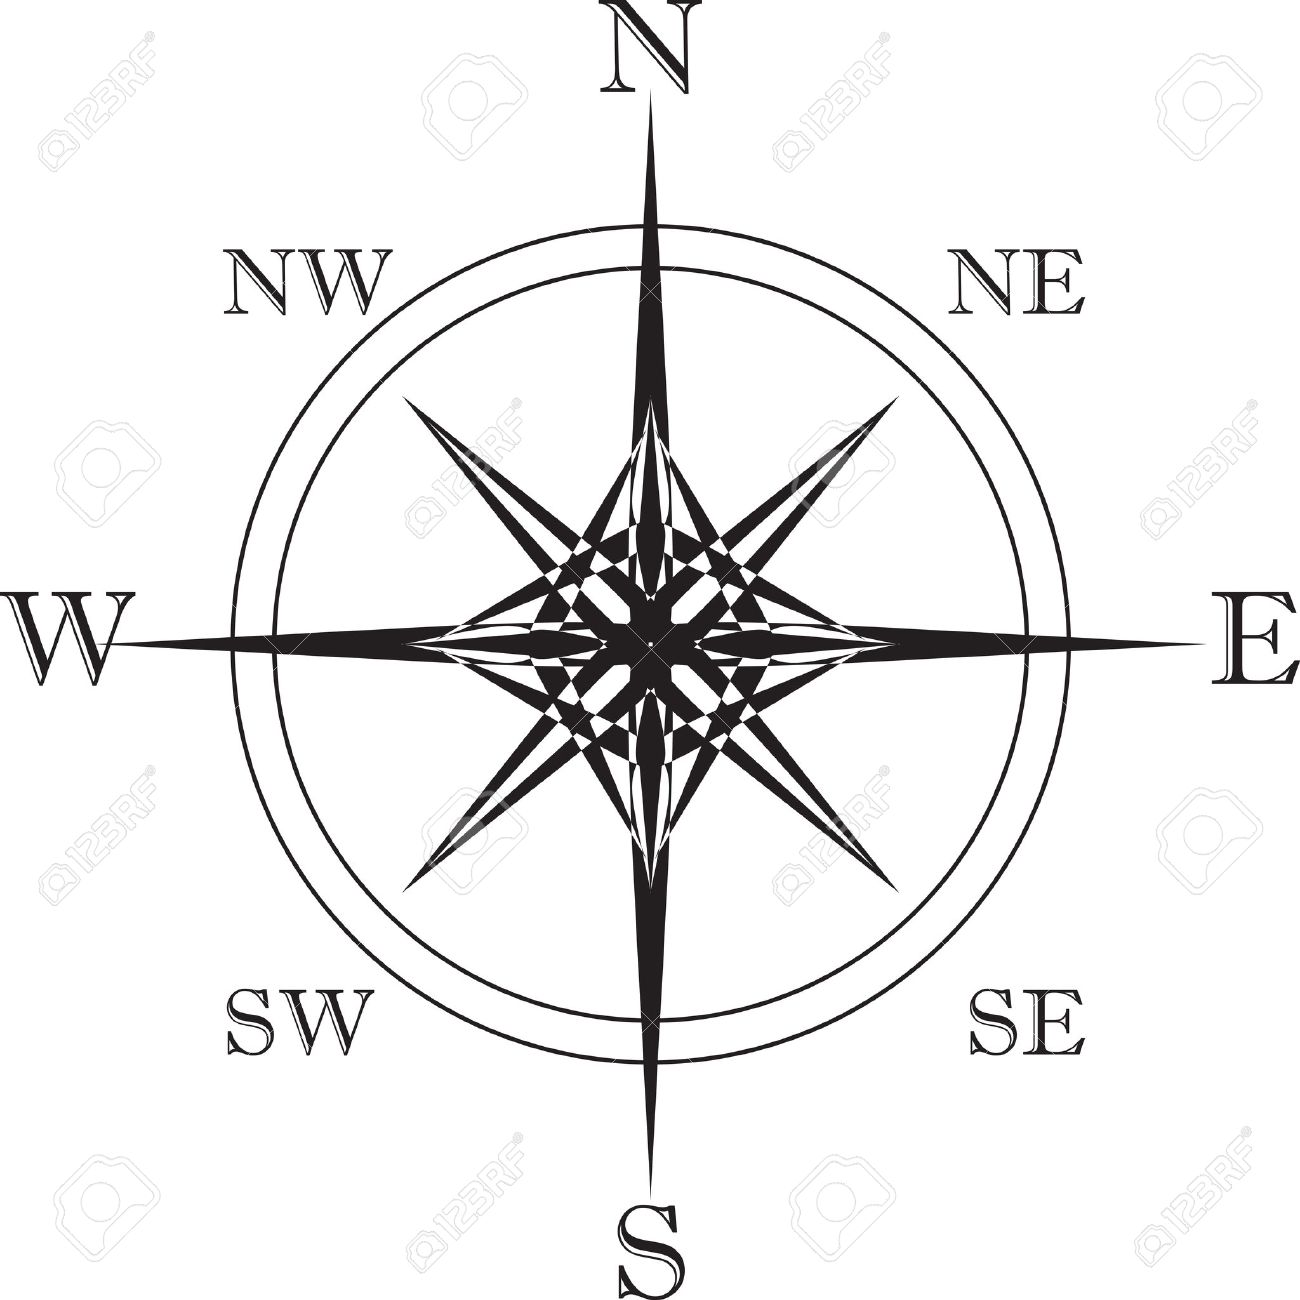 Cardinal Points star in black and white - big eps file Stock Vector -  17716979